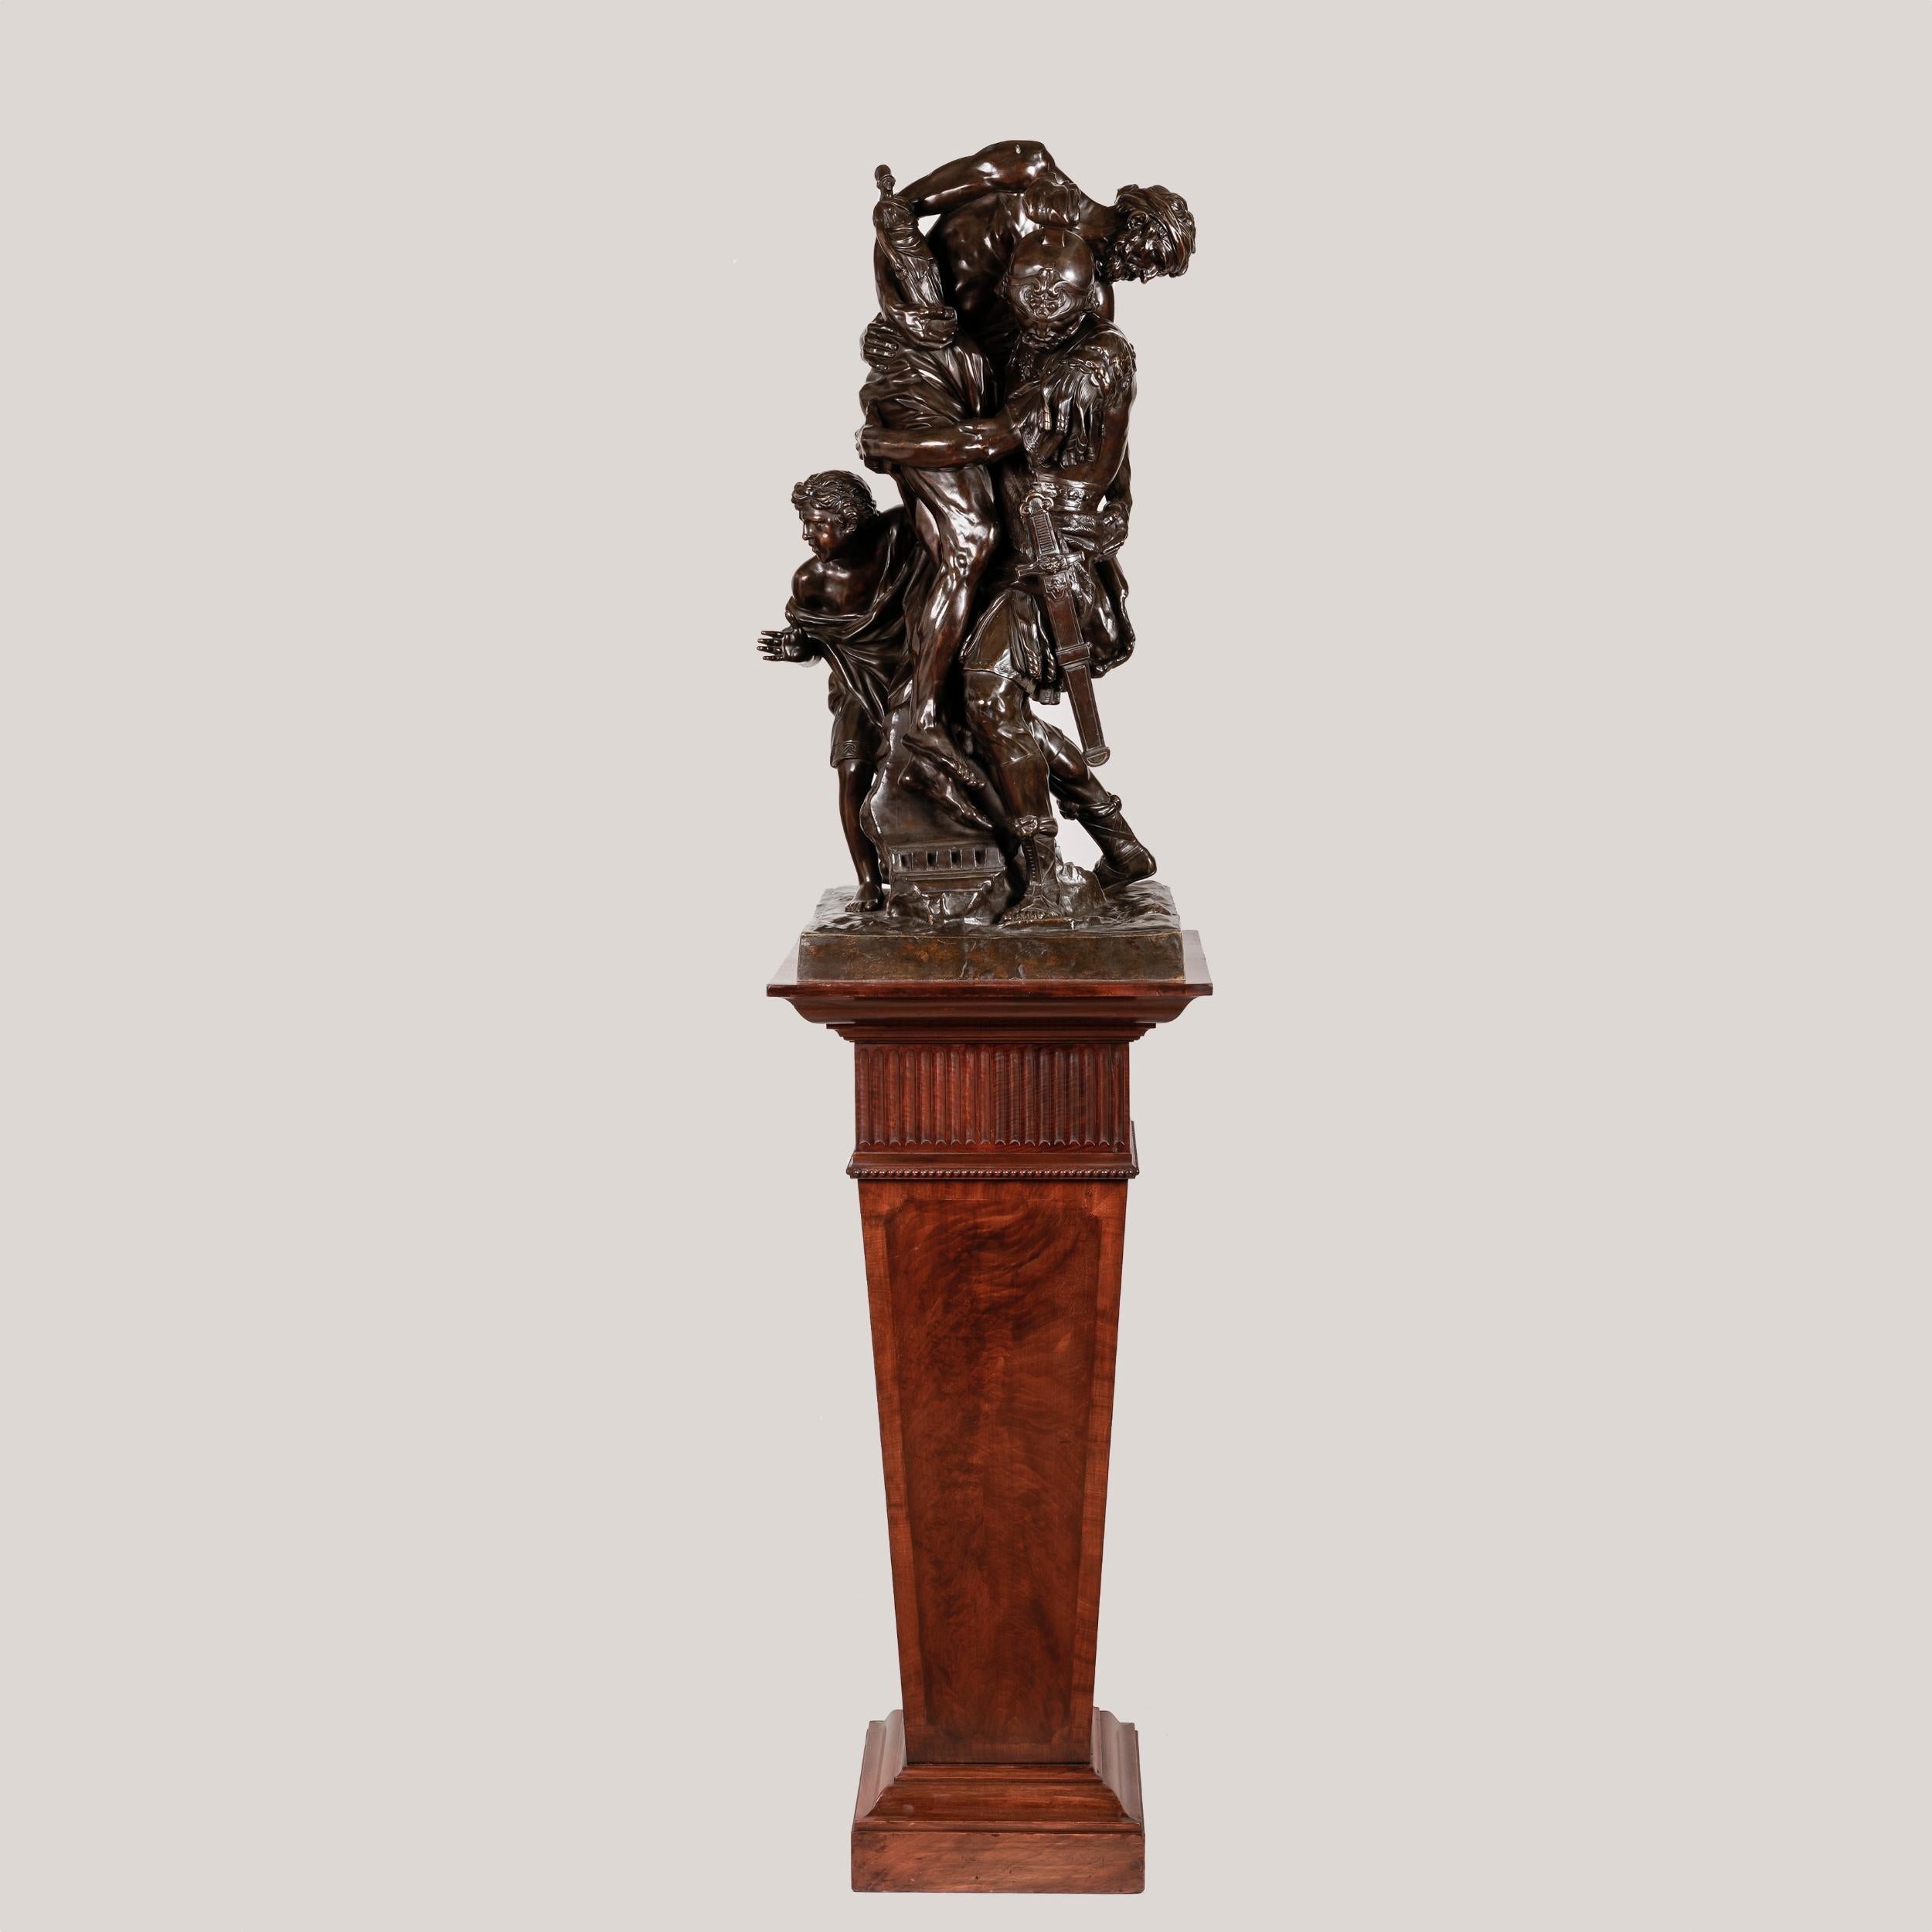 The Flight from Troy
Aeneas Carrying his Father Anchises
After Laurent Guiard (1723-1788)

An impressive bronze with fine patinated surface, depicting the hero Aeneas carrying his aged father over his shoulder and accompanied by his young son